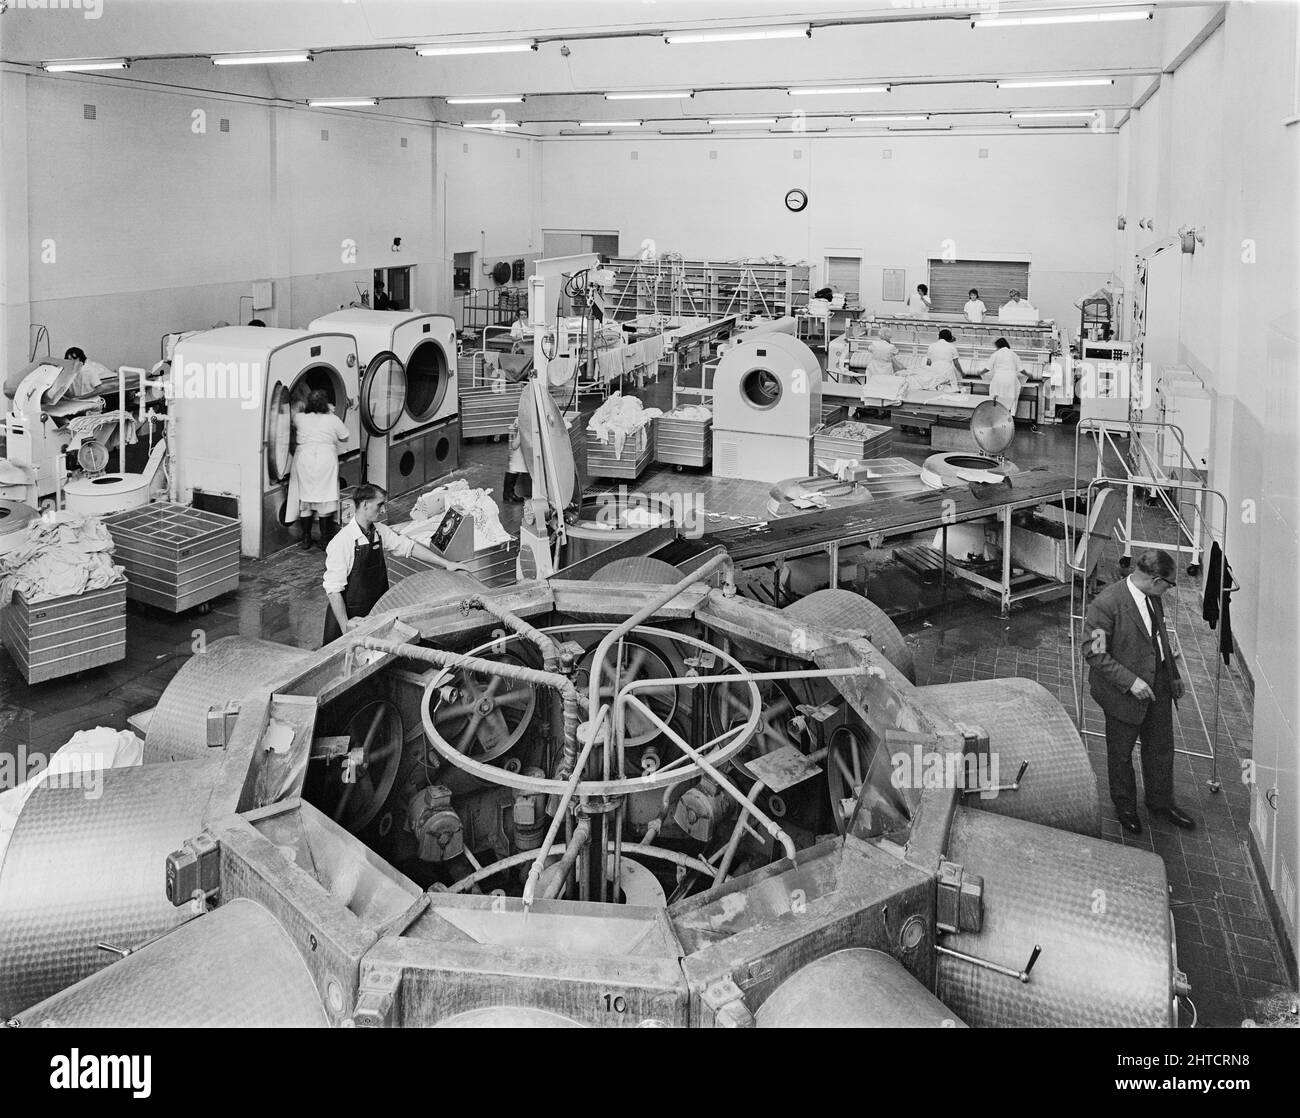 West Cumberland Hospital, Homewood Road, Homewood, Whitehaven, Copeland, Cumbria, 27/08/1964. Workers washing and pressing bed linen in the laundry at West Cumberland Hospital. Built during the first phase of construction at the site along with the boiler house and workshops, the laundry could handle 45,000 articles a week and serviced a number of hospitals in the region. This photograph appeared in the December 1964 issue of Team Spirit, the Laing company newsletter. Stock Photo